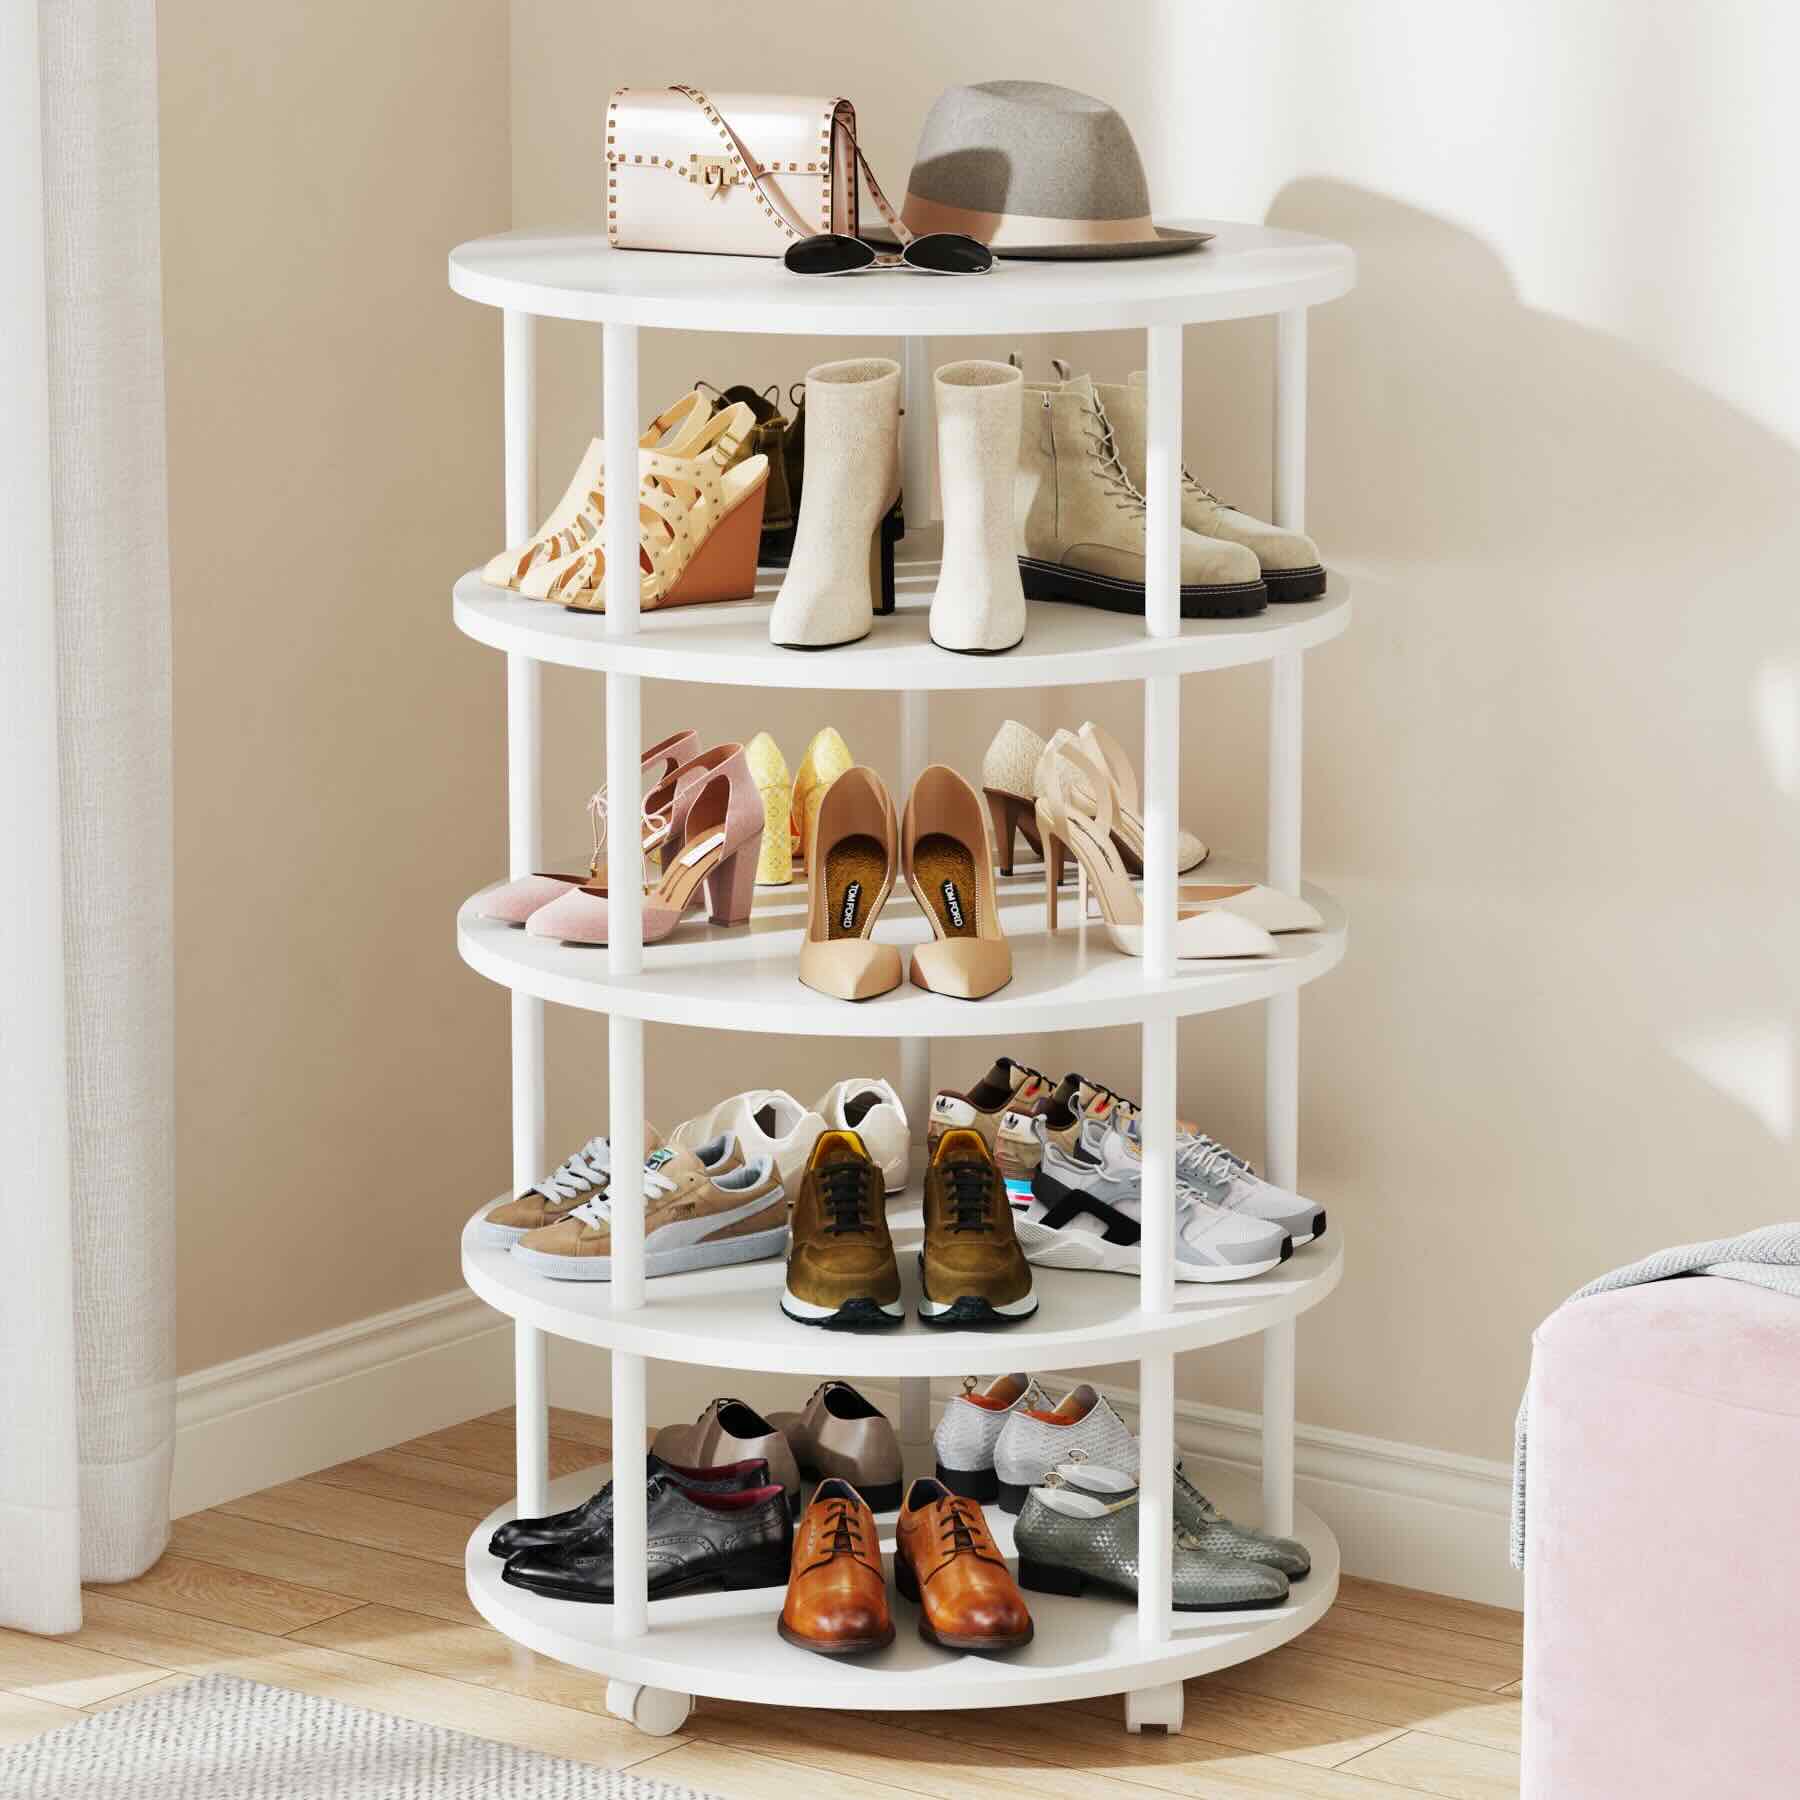 How To Make A Lazy Susan For Shoes